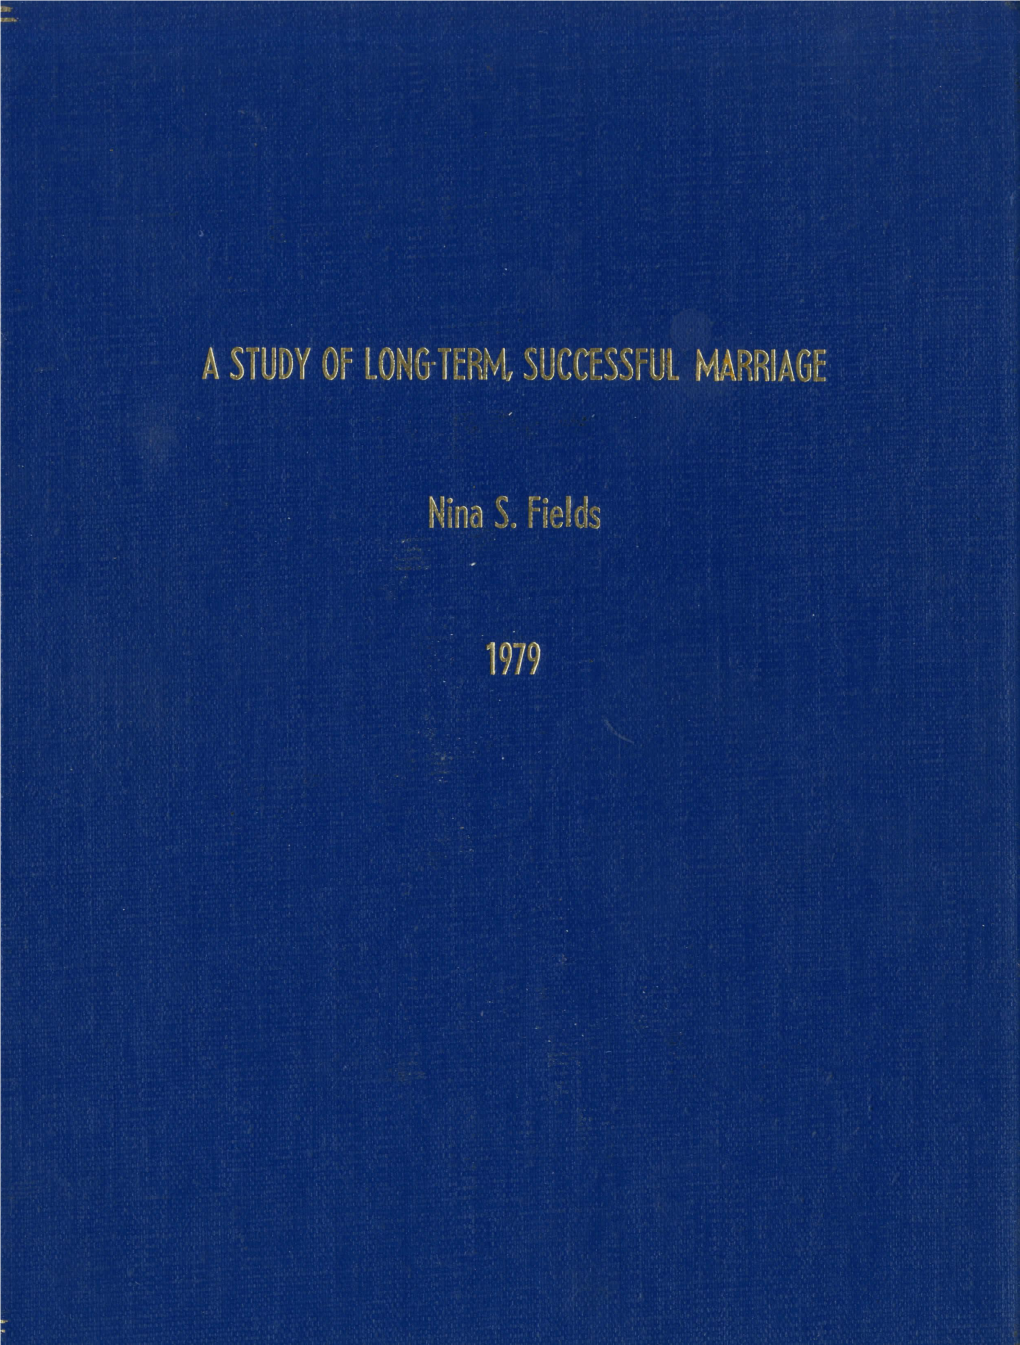 A Study of Long-Term, Successful Marriage